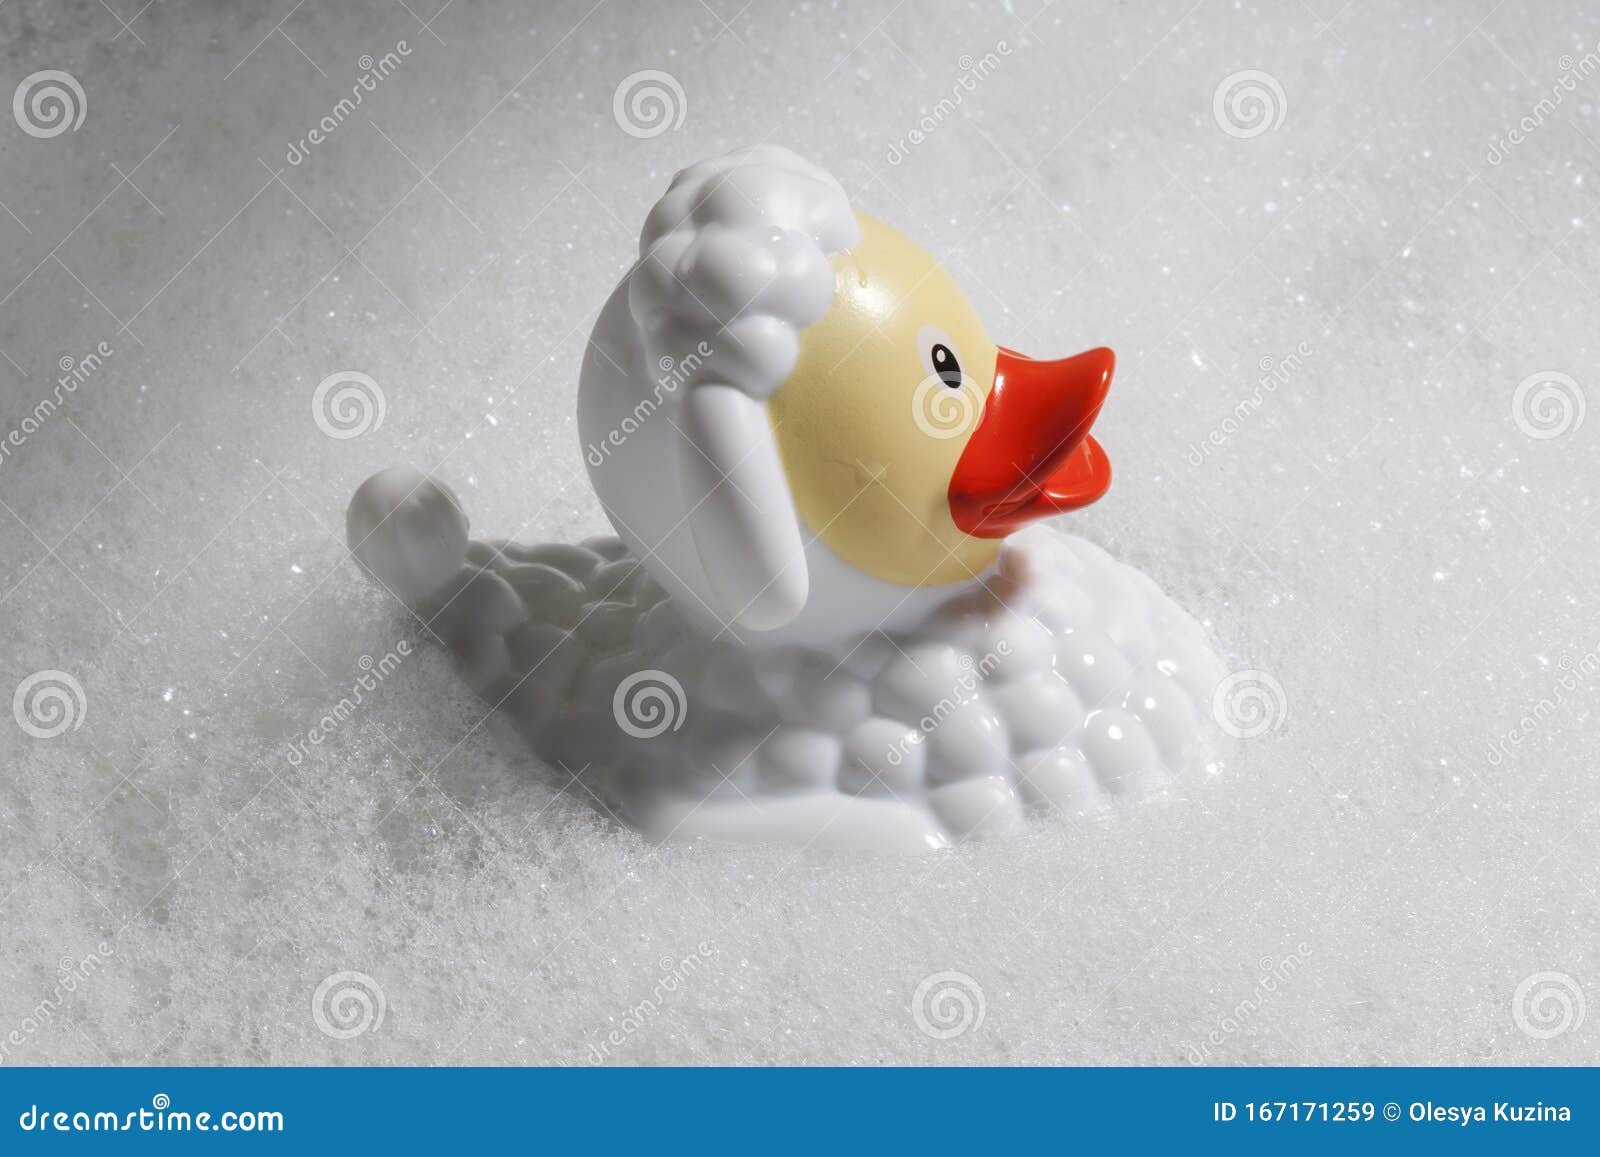 A Rubber Duck in a Sheeps Costume. Funny Toy for the Bathroom Stock Image -  Image of extinguisher, bath: 167171259